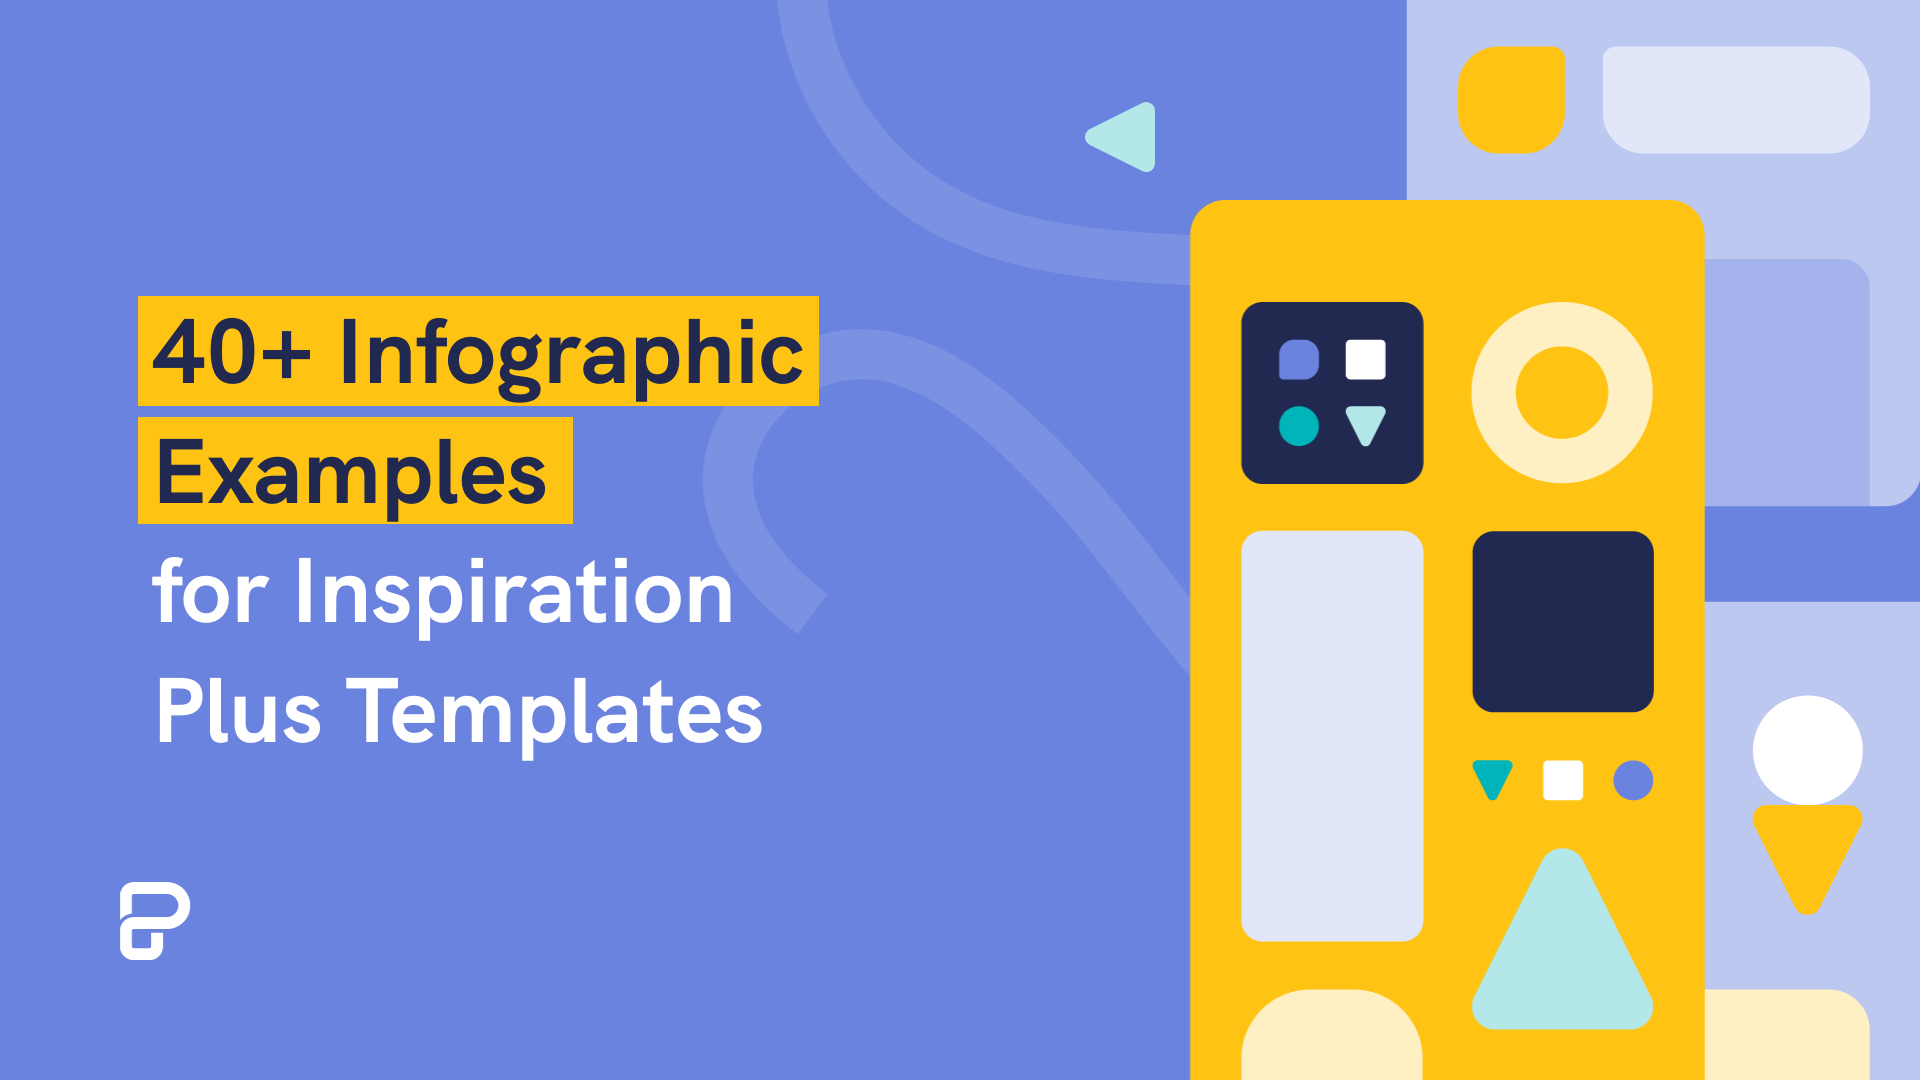 featured image for infographic examples